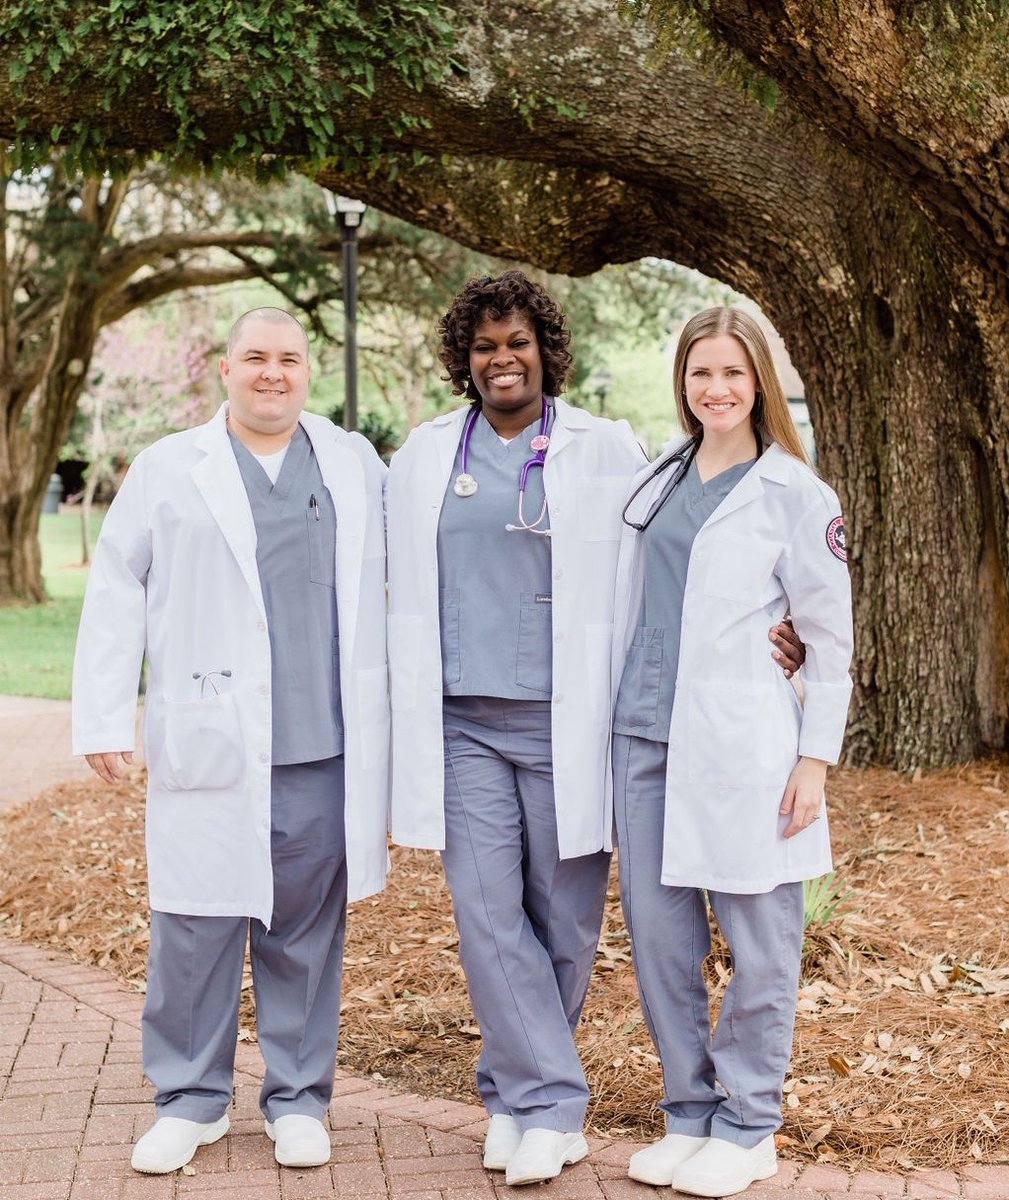 Coastal Alabama Nursing is accepting applications for the new stand-alone Licensed Practical Nursing (LPN) program on the Thomasville Campus! 🏥 Apply by October 1, 2022 for Spring Semester entry! Click the link to apply now: bit.ly/3SHxlOO